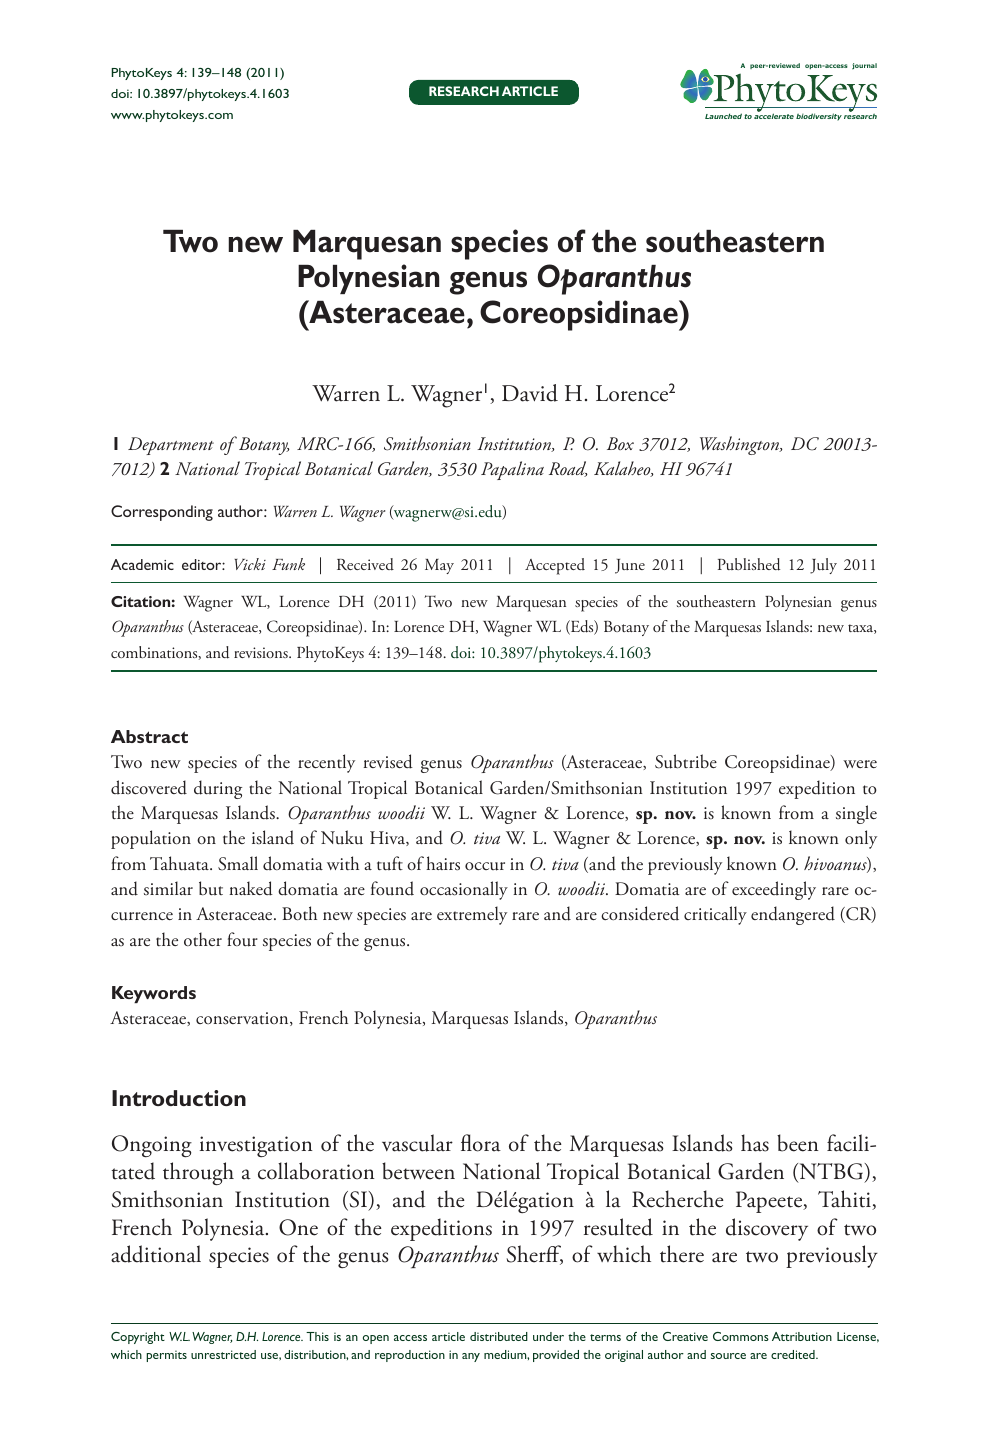 Two New Marquesan Species Of The Southeastern Polynesian Genus Oparanthus Asteraceae Coreopsidinae Topic Of Research Paper In Biological Sciences Download Scholarly Article Pdf And Read For Free On Cyberleninka Open Science